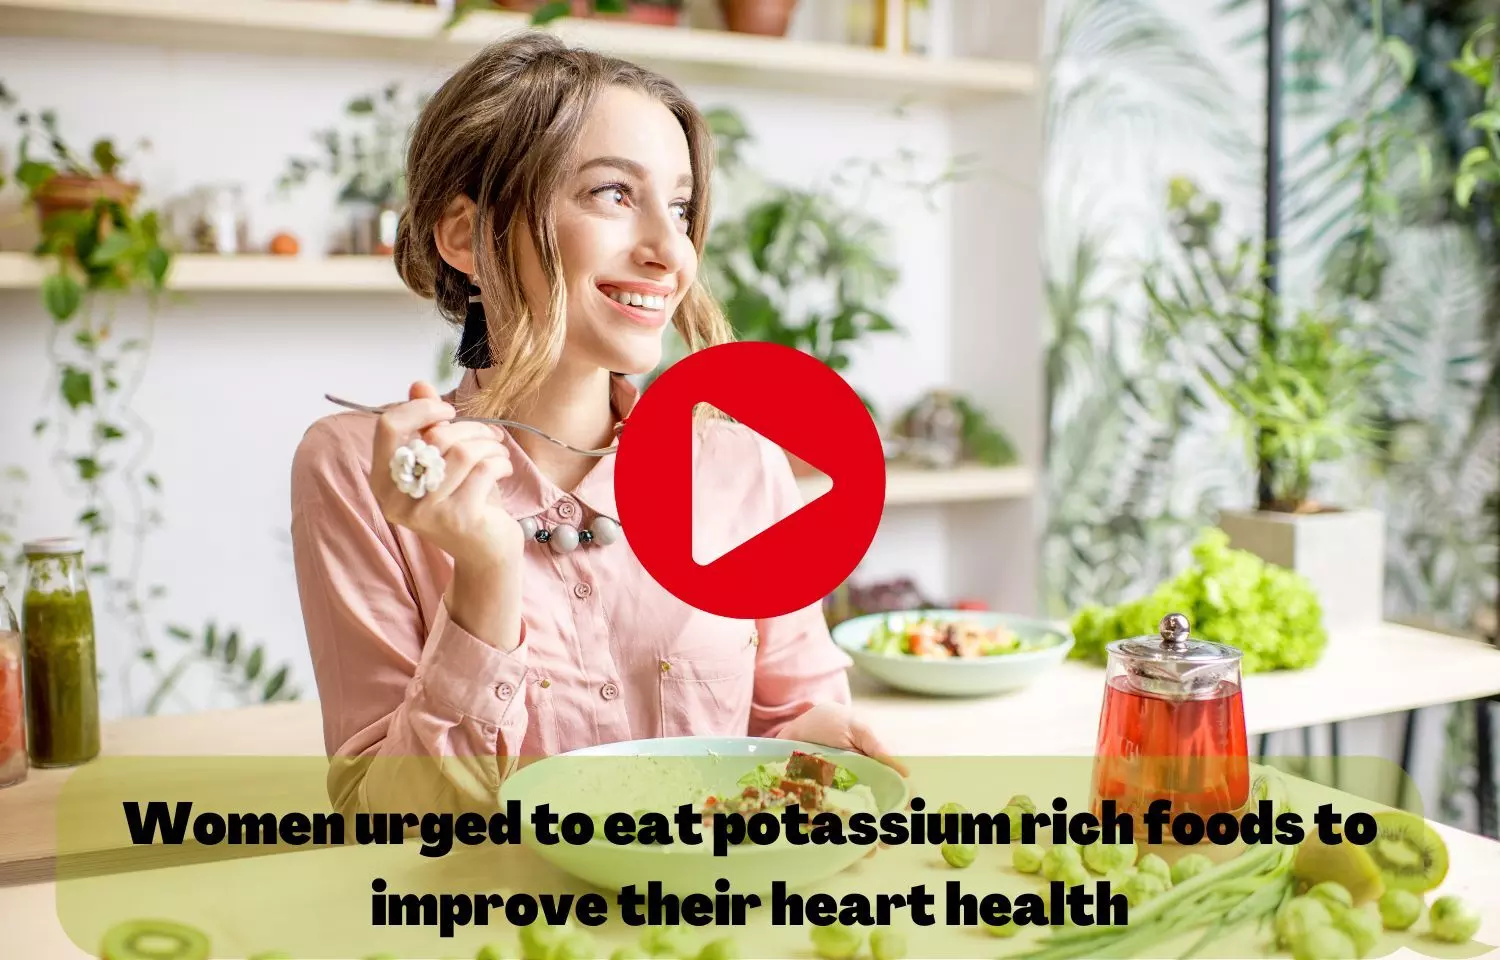 Women urged to eat potassium rich foods to improve their heart health